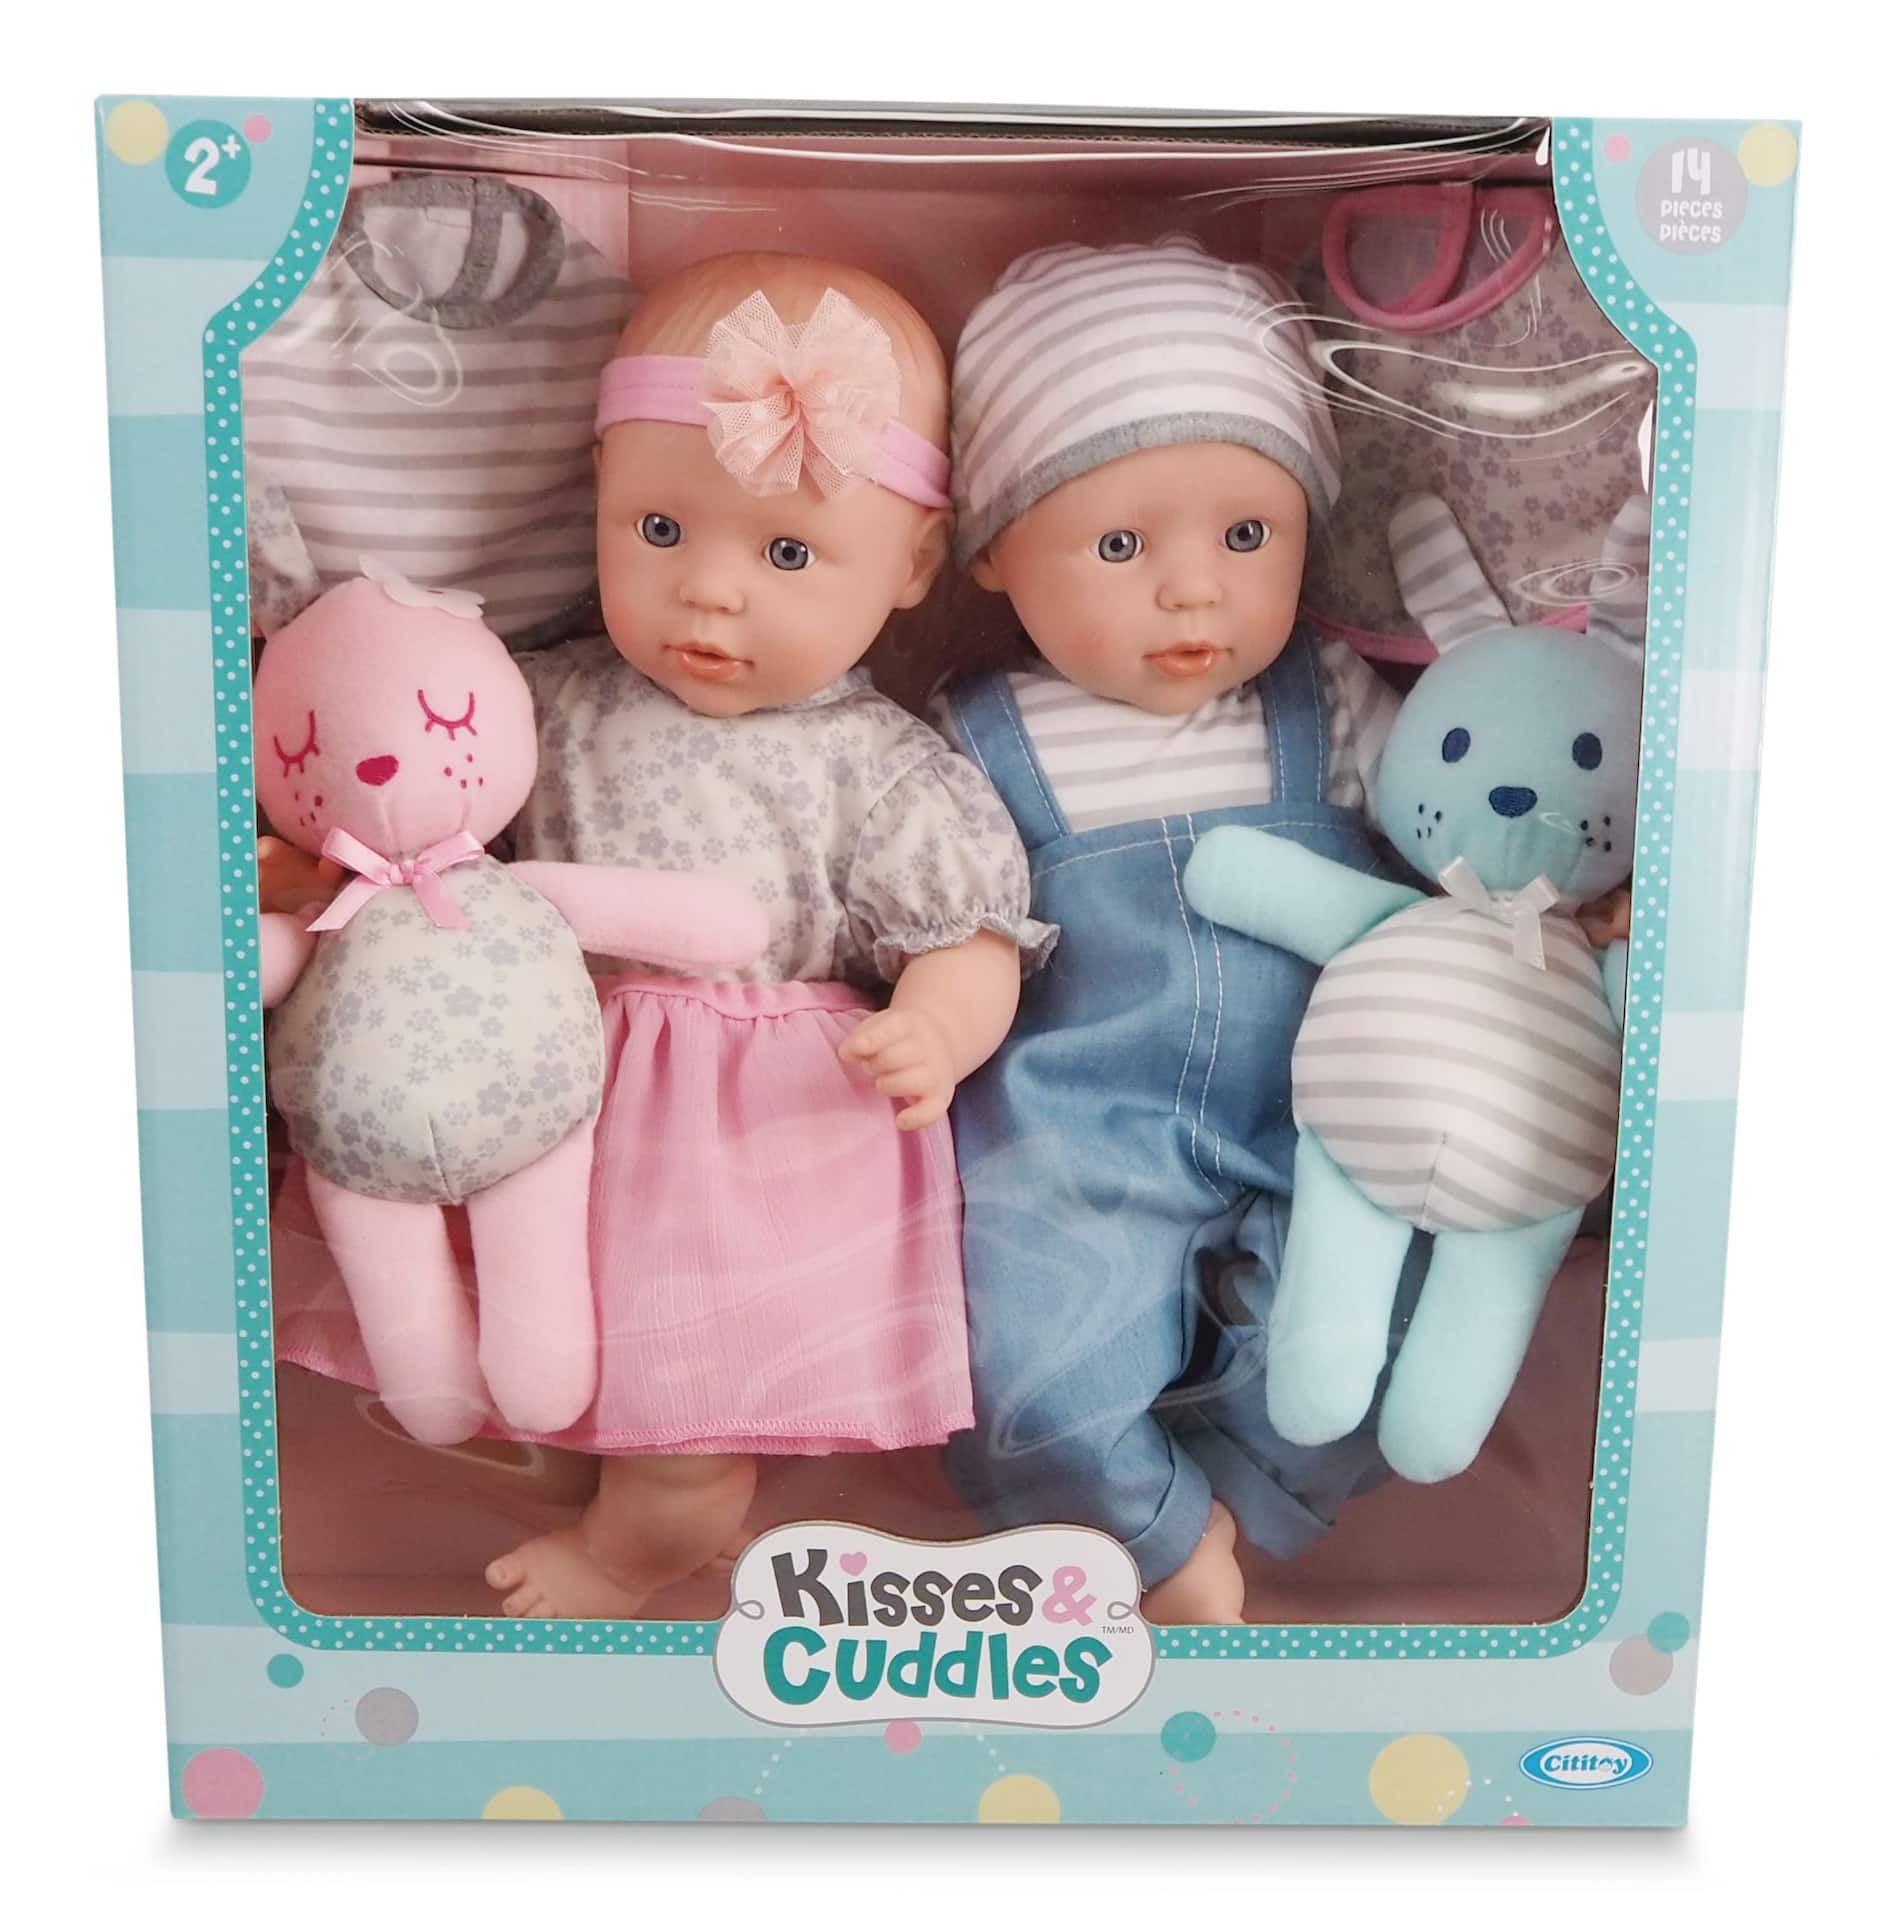 https://media-www.canadiantire.ca/product/seasonal-gardening/toys/toys-games/0506575/kisses-and-cuddles-14-baby-twins-set-66465de6-f709-4889-a0c5-6596943343d0-jpgrendition.jpg